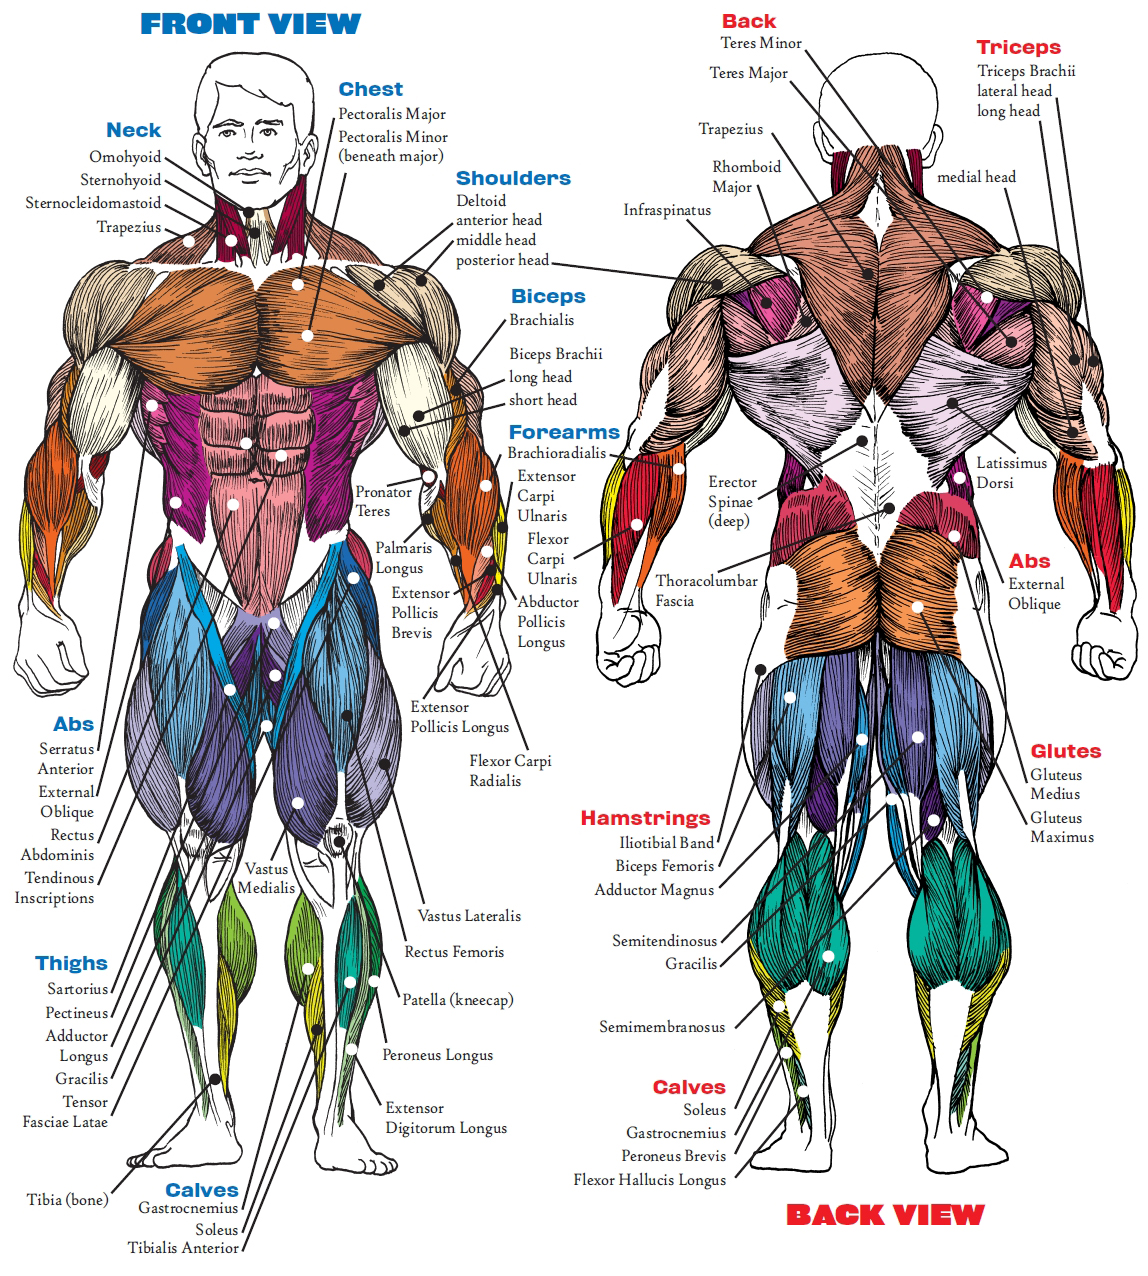 Best Exercises for Major Muscle Groups